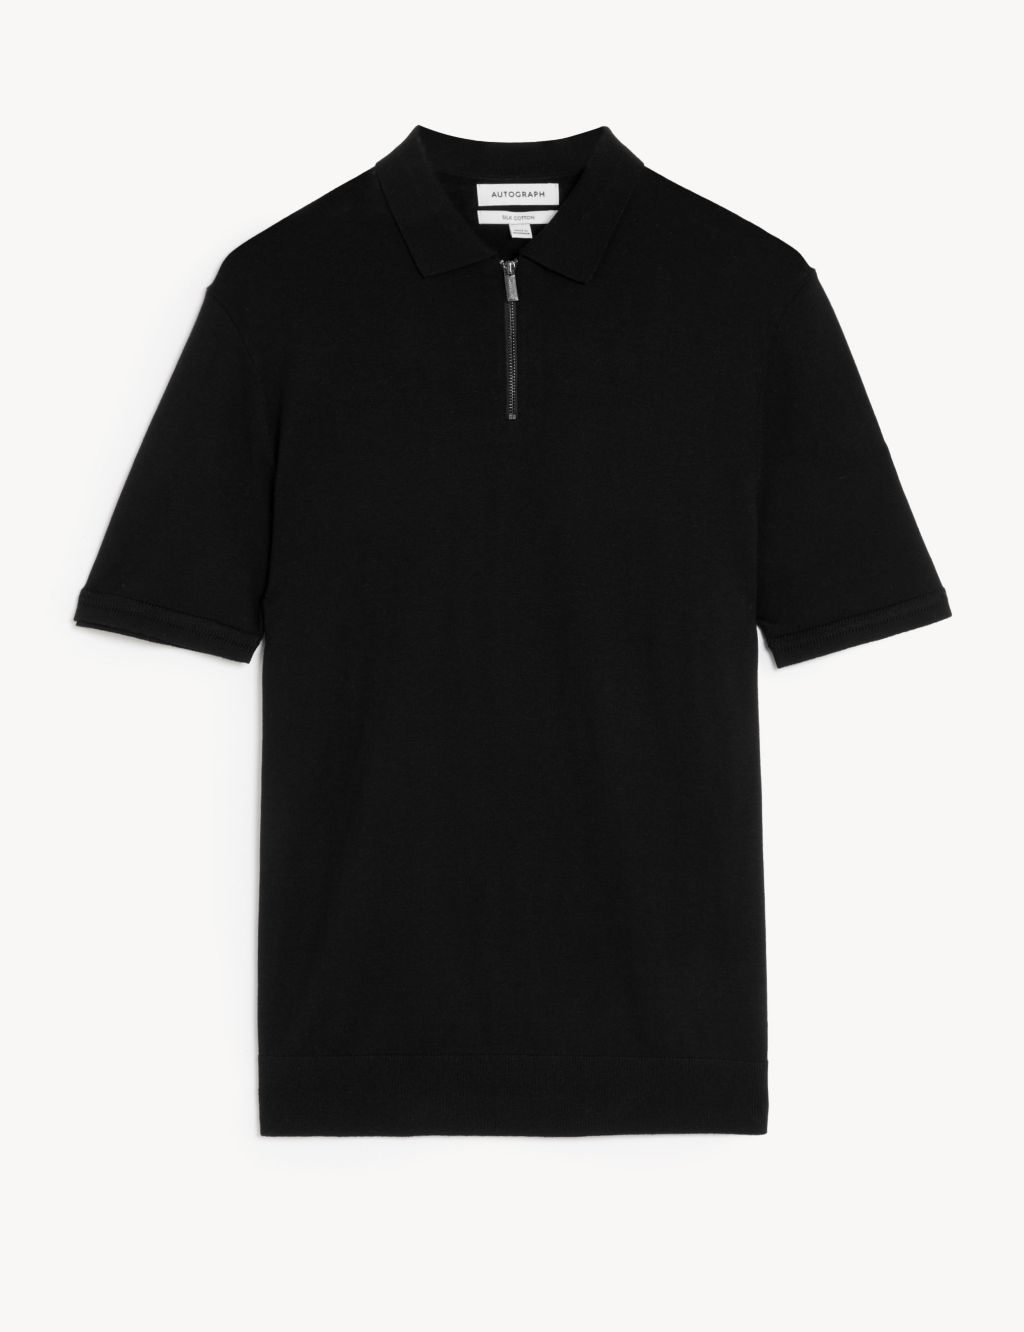 Silk Cotton Short Sleeve Knitted Polo Shirt image 2